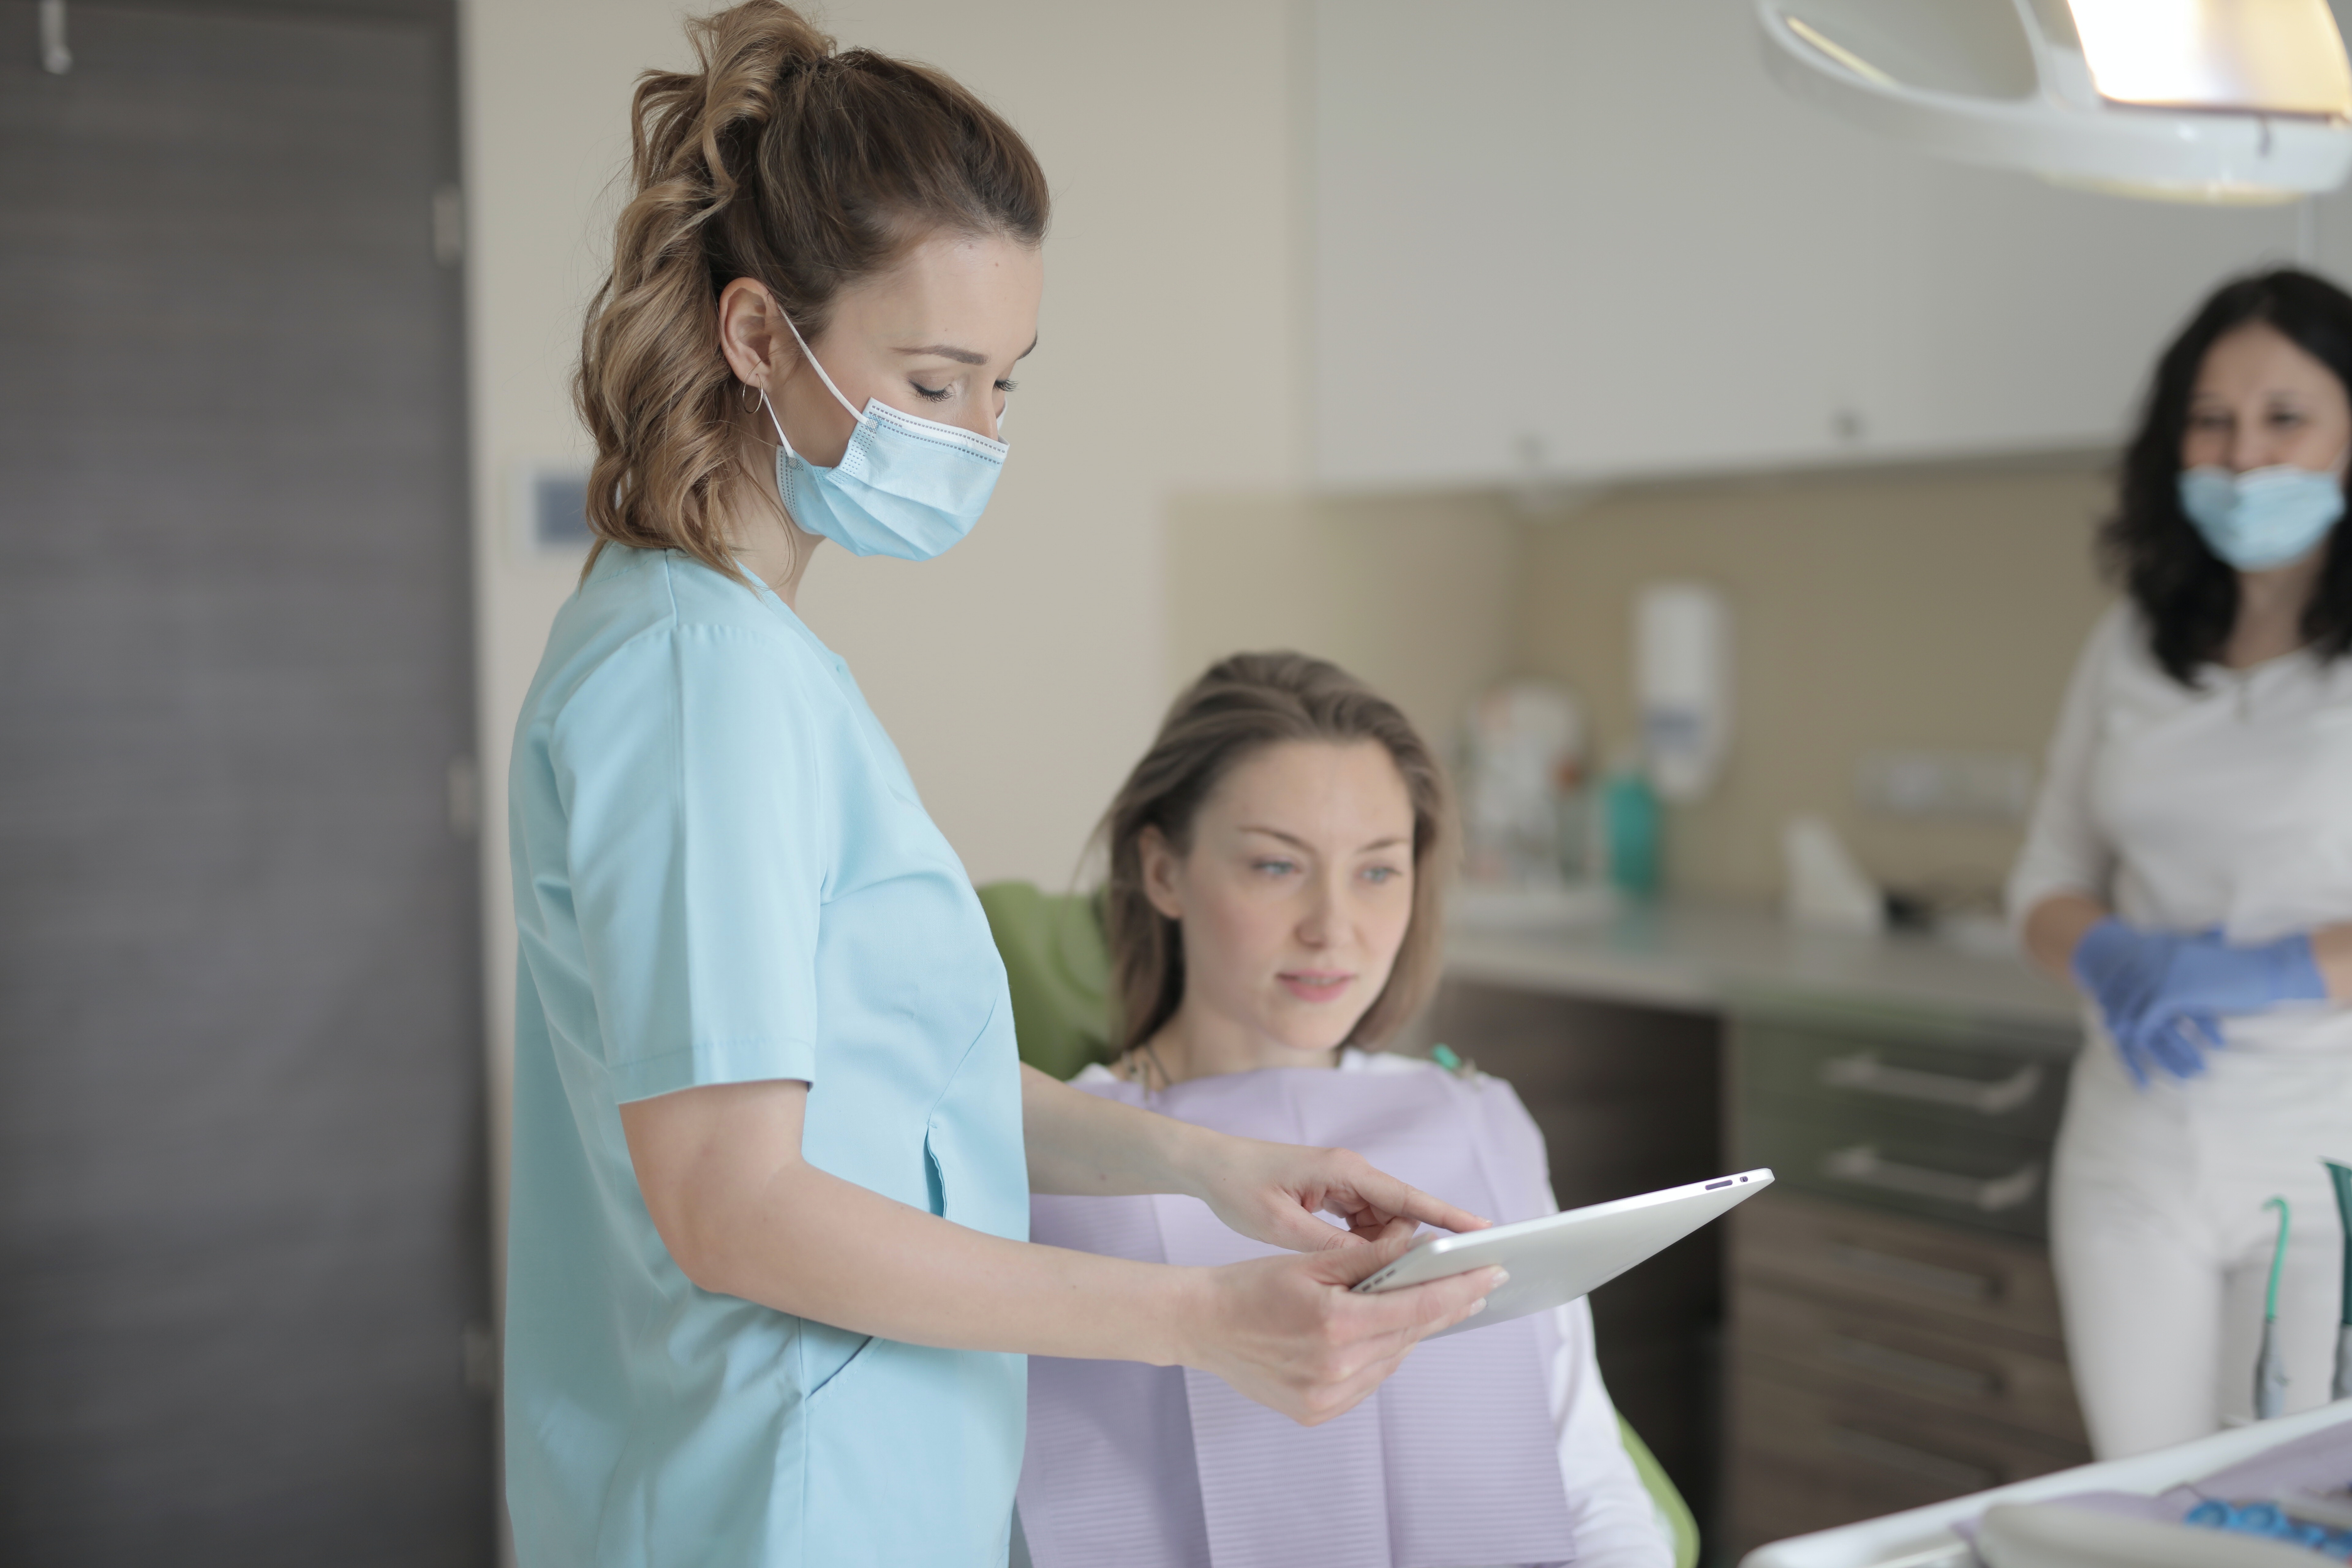 Woman speaking to her dentist about the use of temporary dental fillings as part of a treatment plan